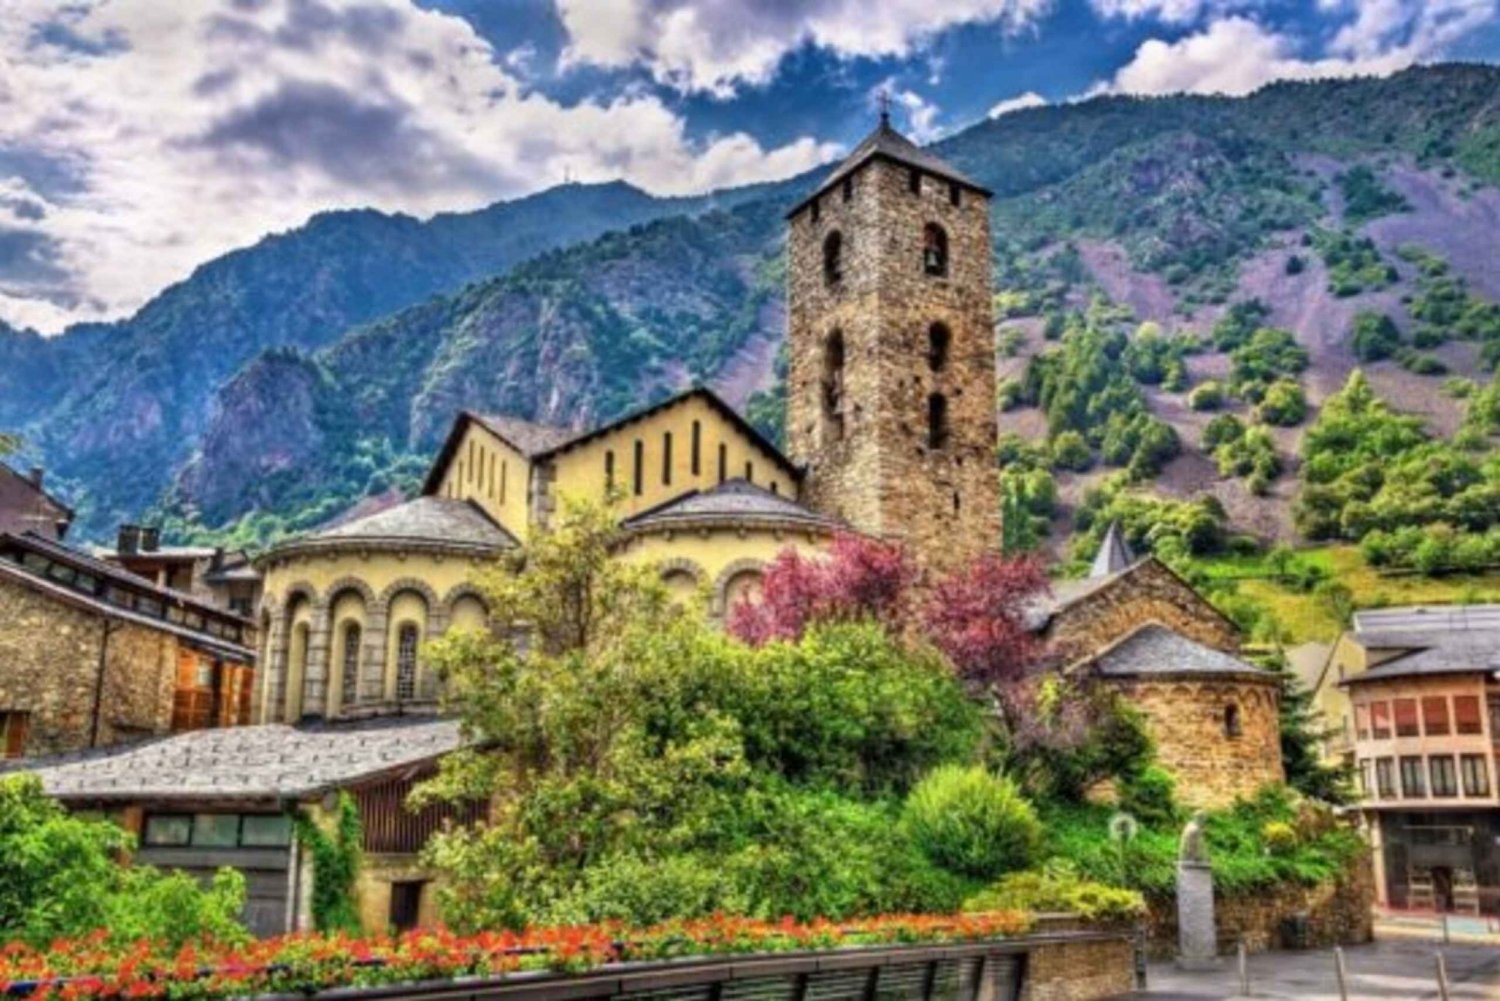 From Barcelona: Guided Day Trip to Andorra and France